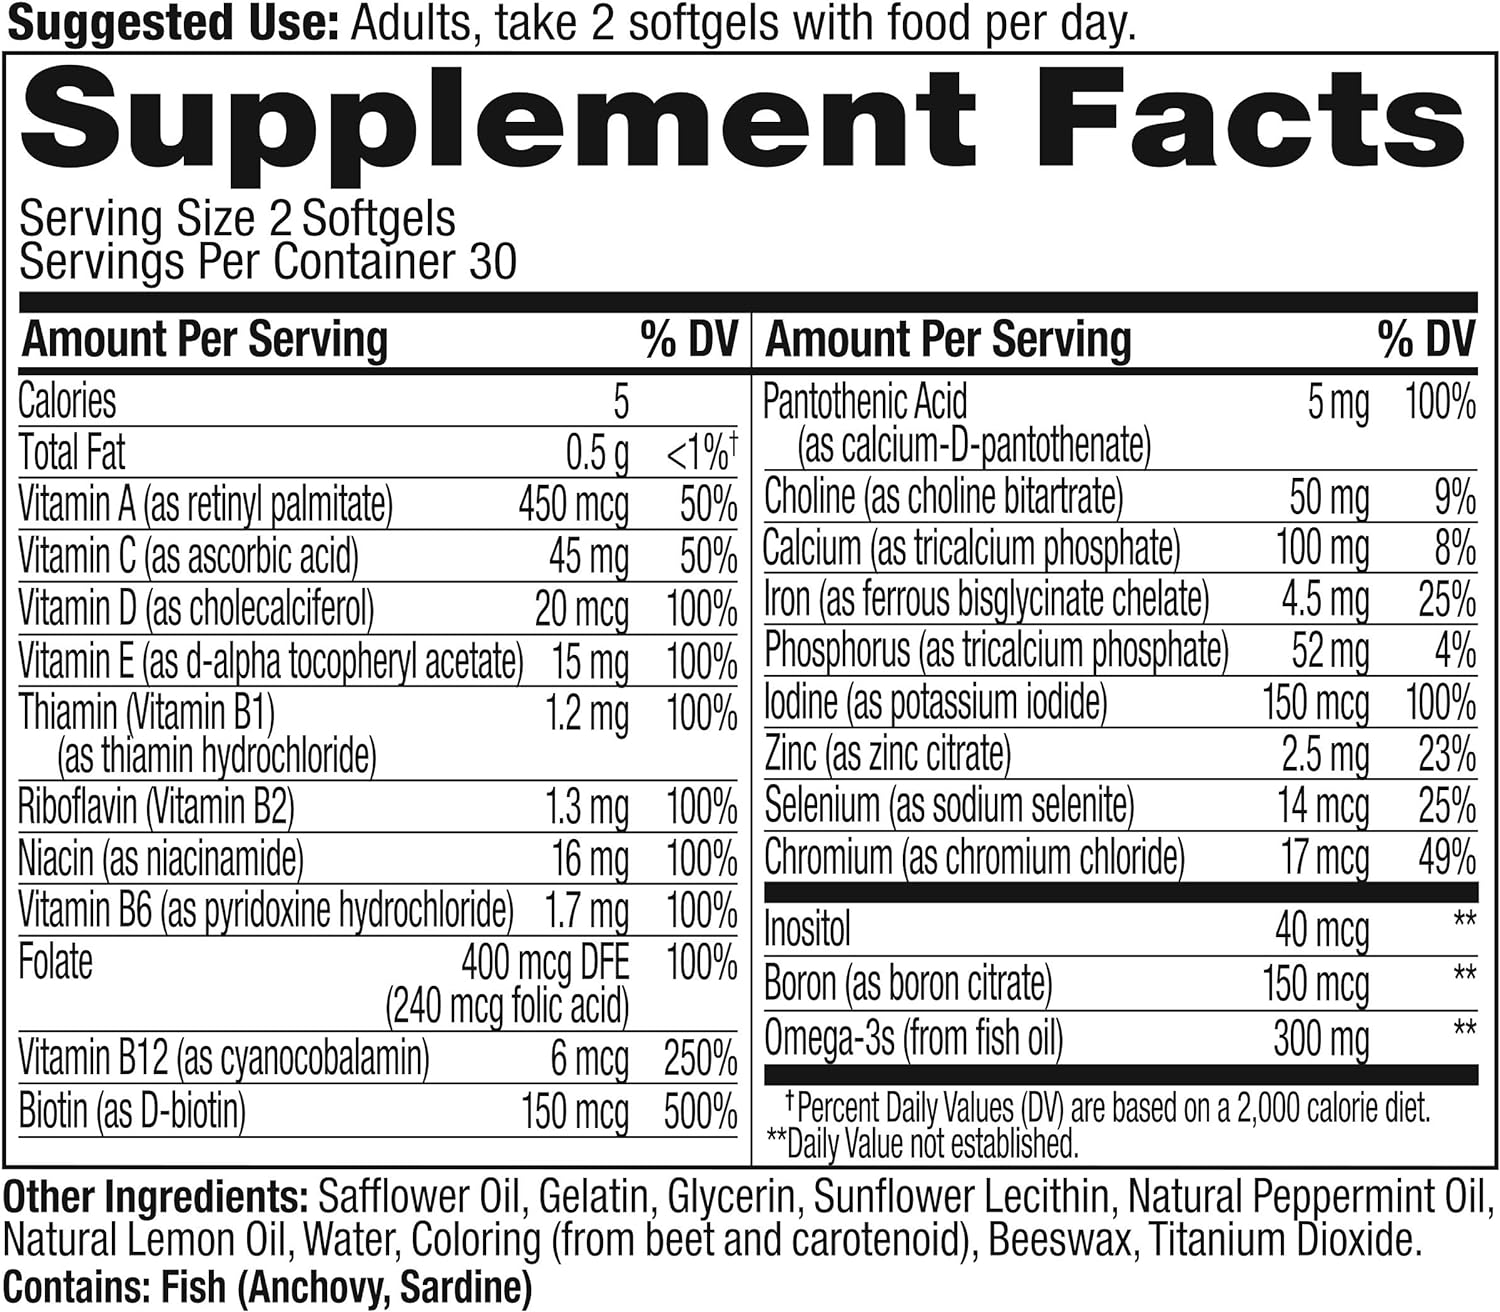 OLLY Ultra Womens Multi Softgels, Overall Health and Immune Support, Omega-3s, Iron, Vitamins A, D, C, E, B12, Daily Multivitamin, 30 Day Supply - 60 Count